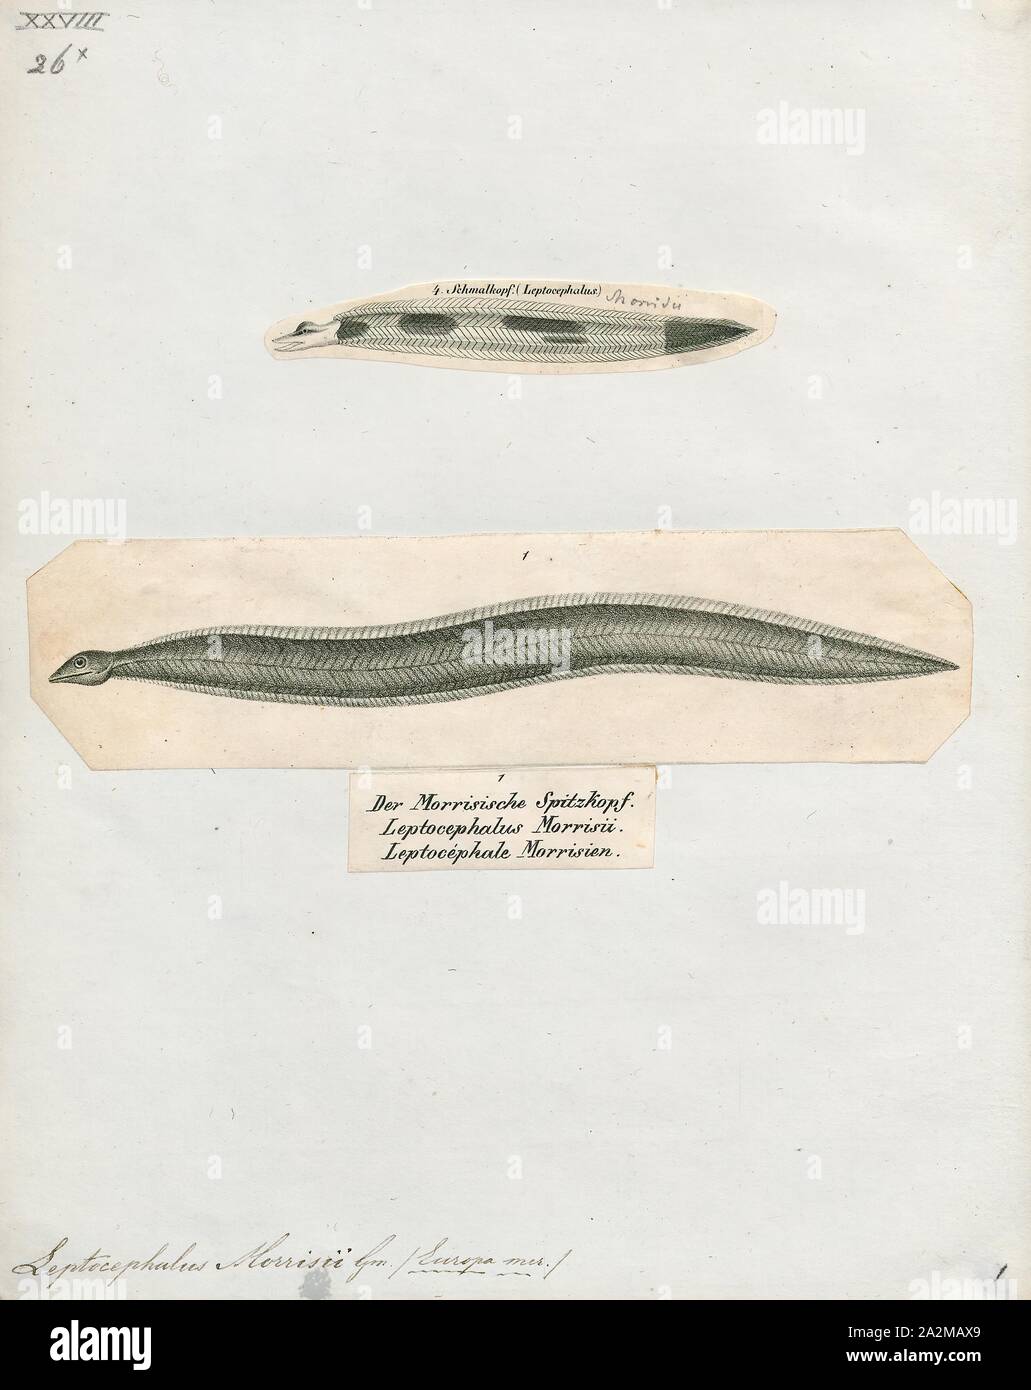 Conger vulgaris, Print, Conger is a genus of marine congrid eels. It includes some of the largest types of eels, ranging up to 3 m (10 ft) in length, in the case of the European conger. Large congers have often been observed by divers during the day in parts of the Mediterranean Sea, and both European and American congers are sometimes caught by fishermen along the European and North American coasts., 1700-1880 Stock Photo